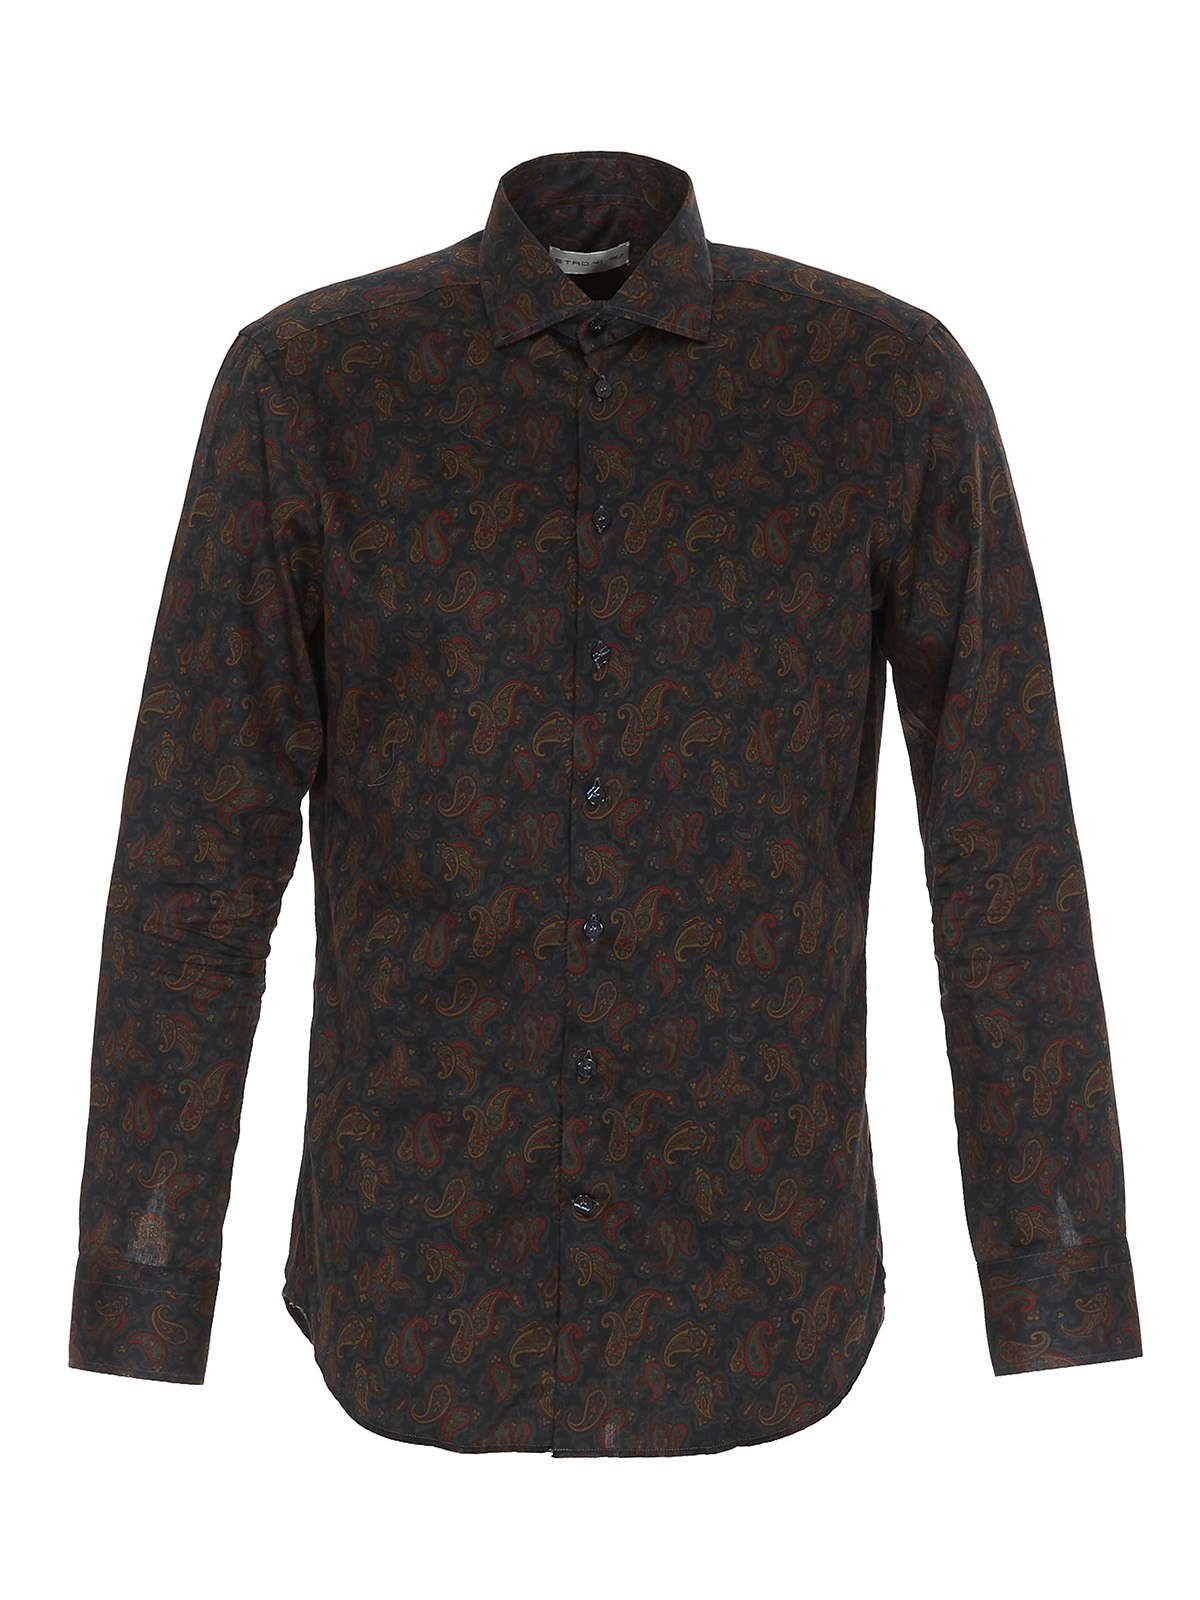 Etro shirt in cotton with print